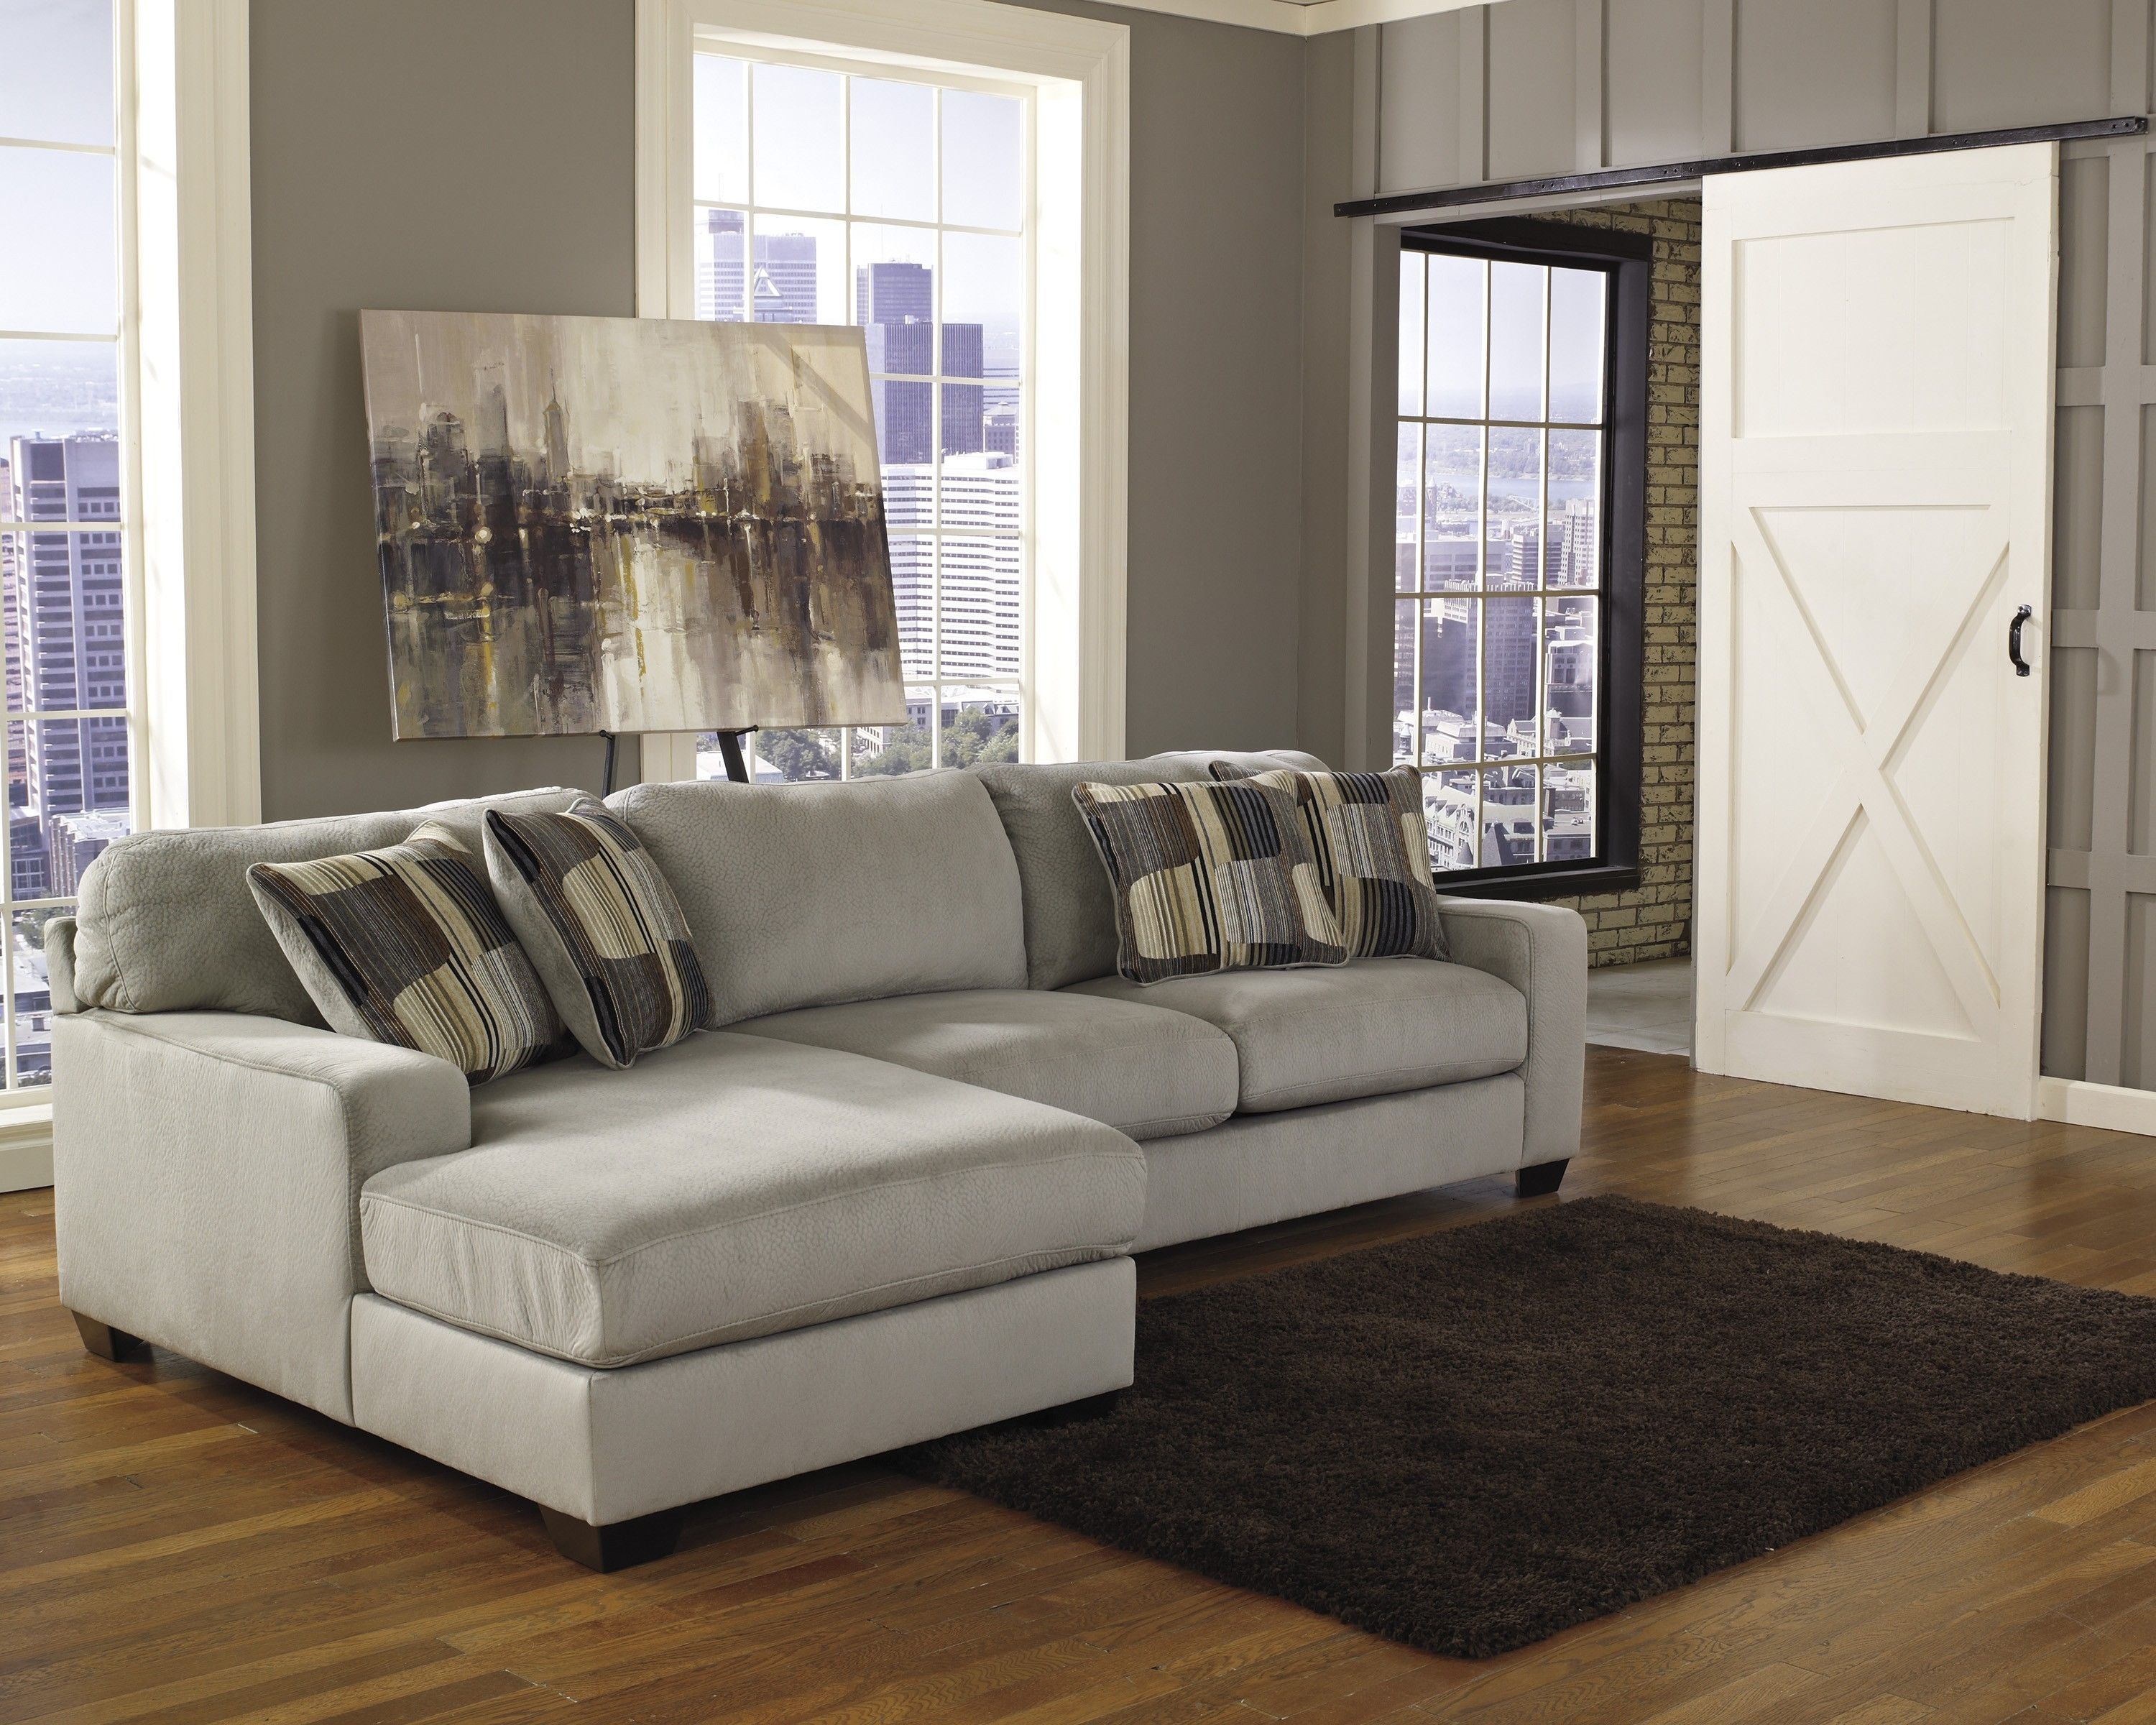 Popular Grey Velvet Sectional Sofa 87 With Additional Classic Intended For Classic Sectional Sofas (View 12 of 12)